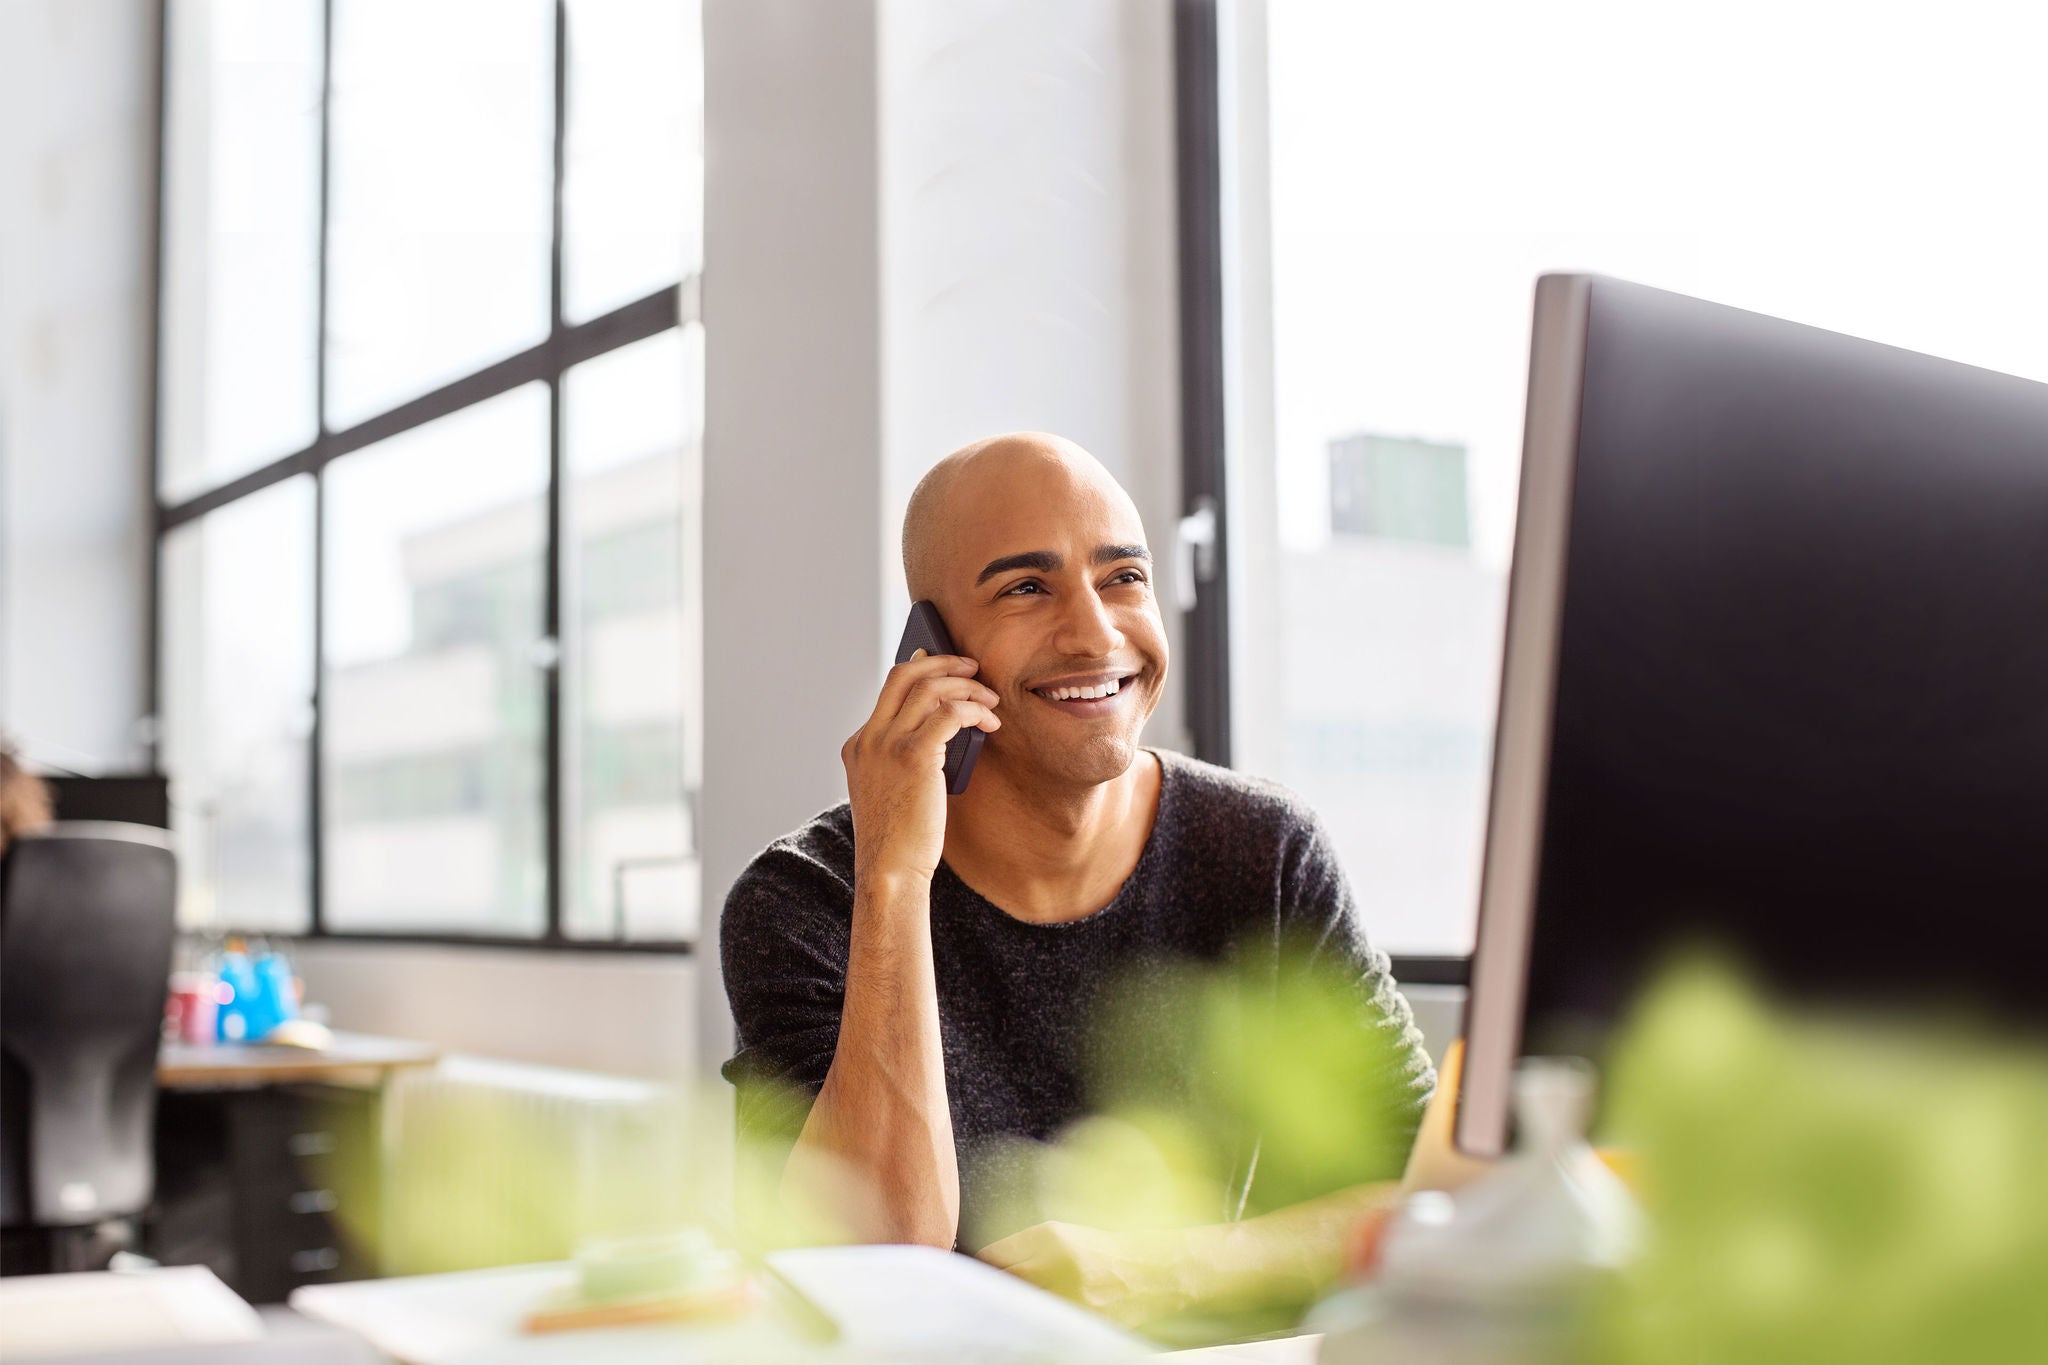 Mature man talking on phone and smiling. Hispanic male professional working at his desk in office.